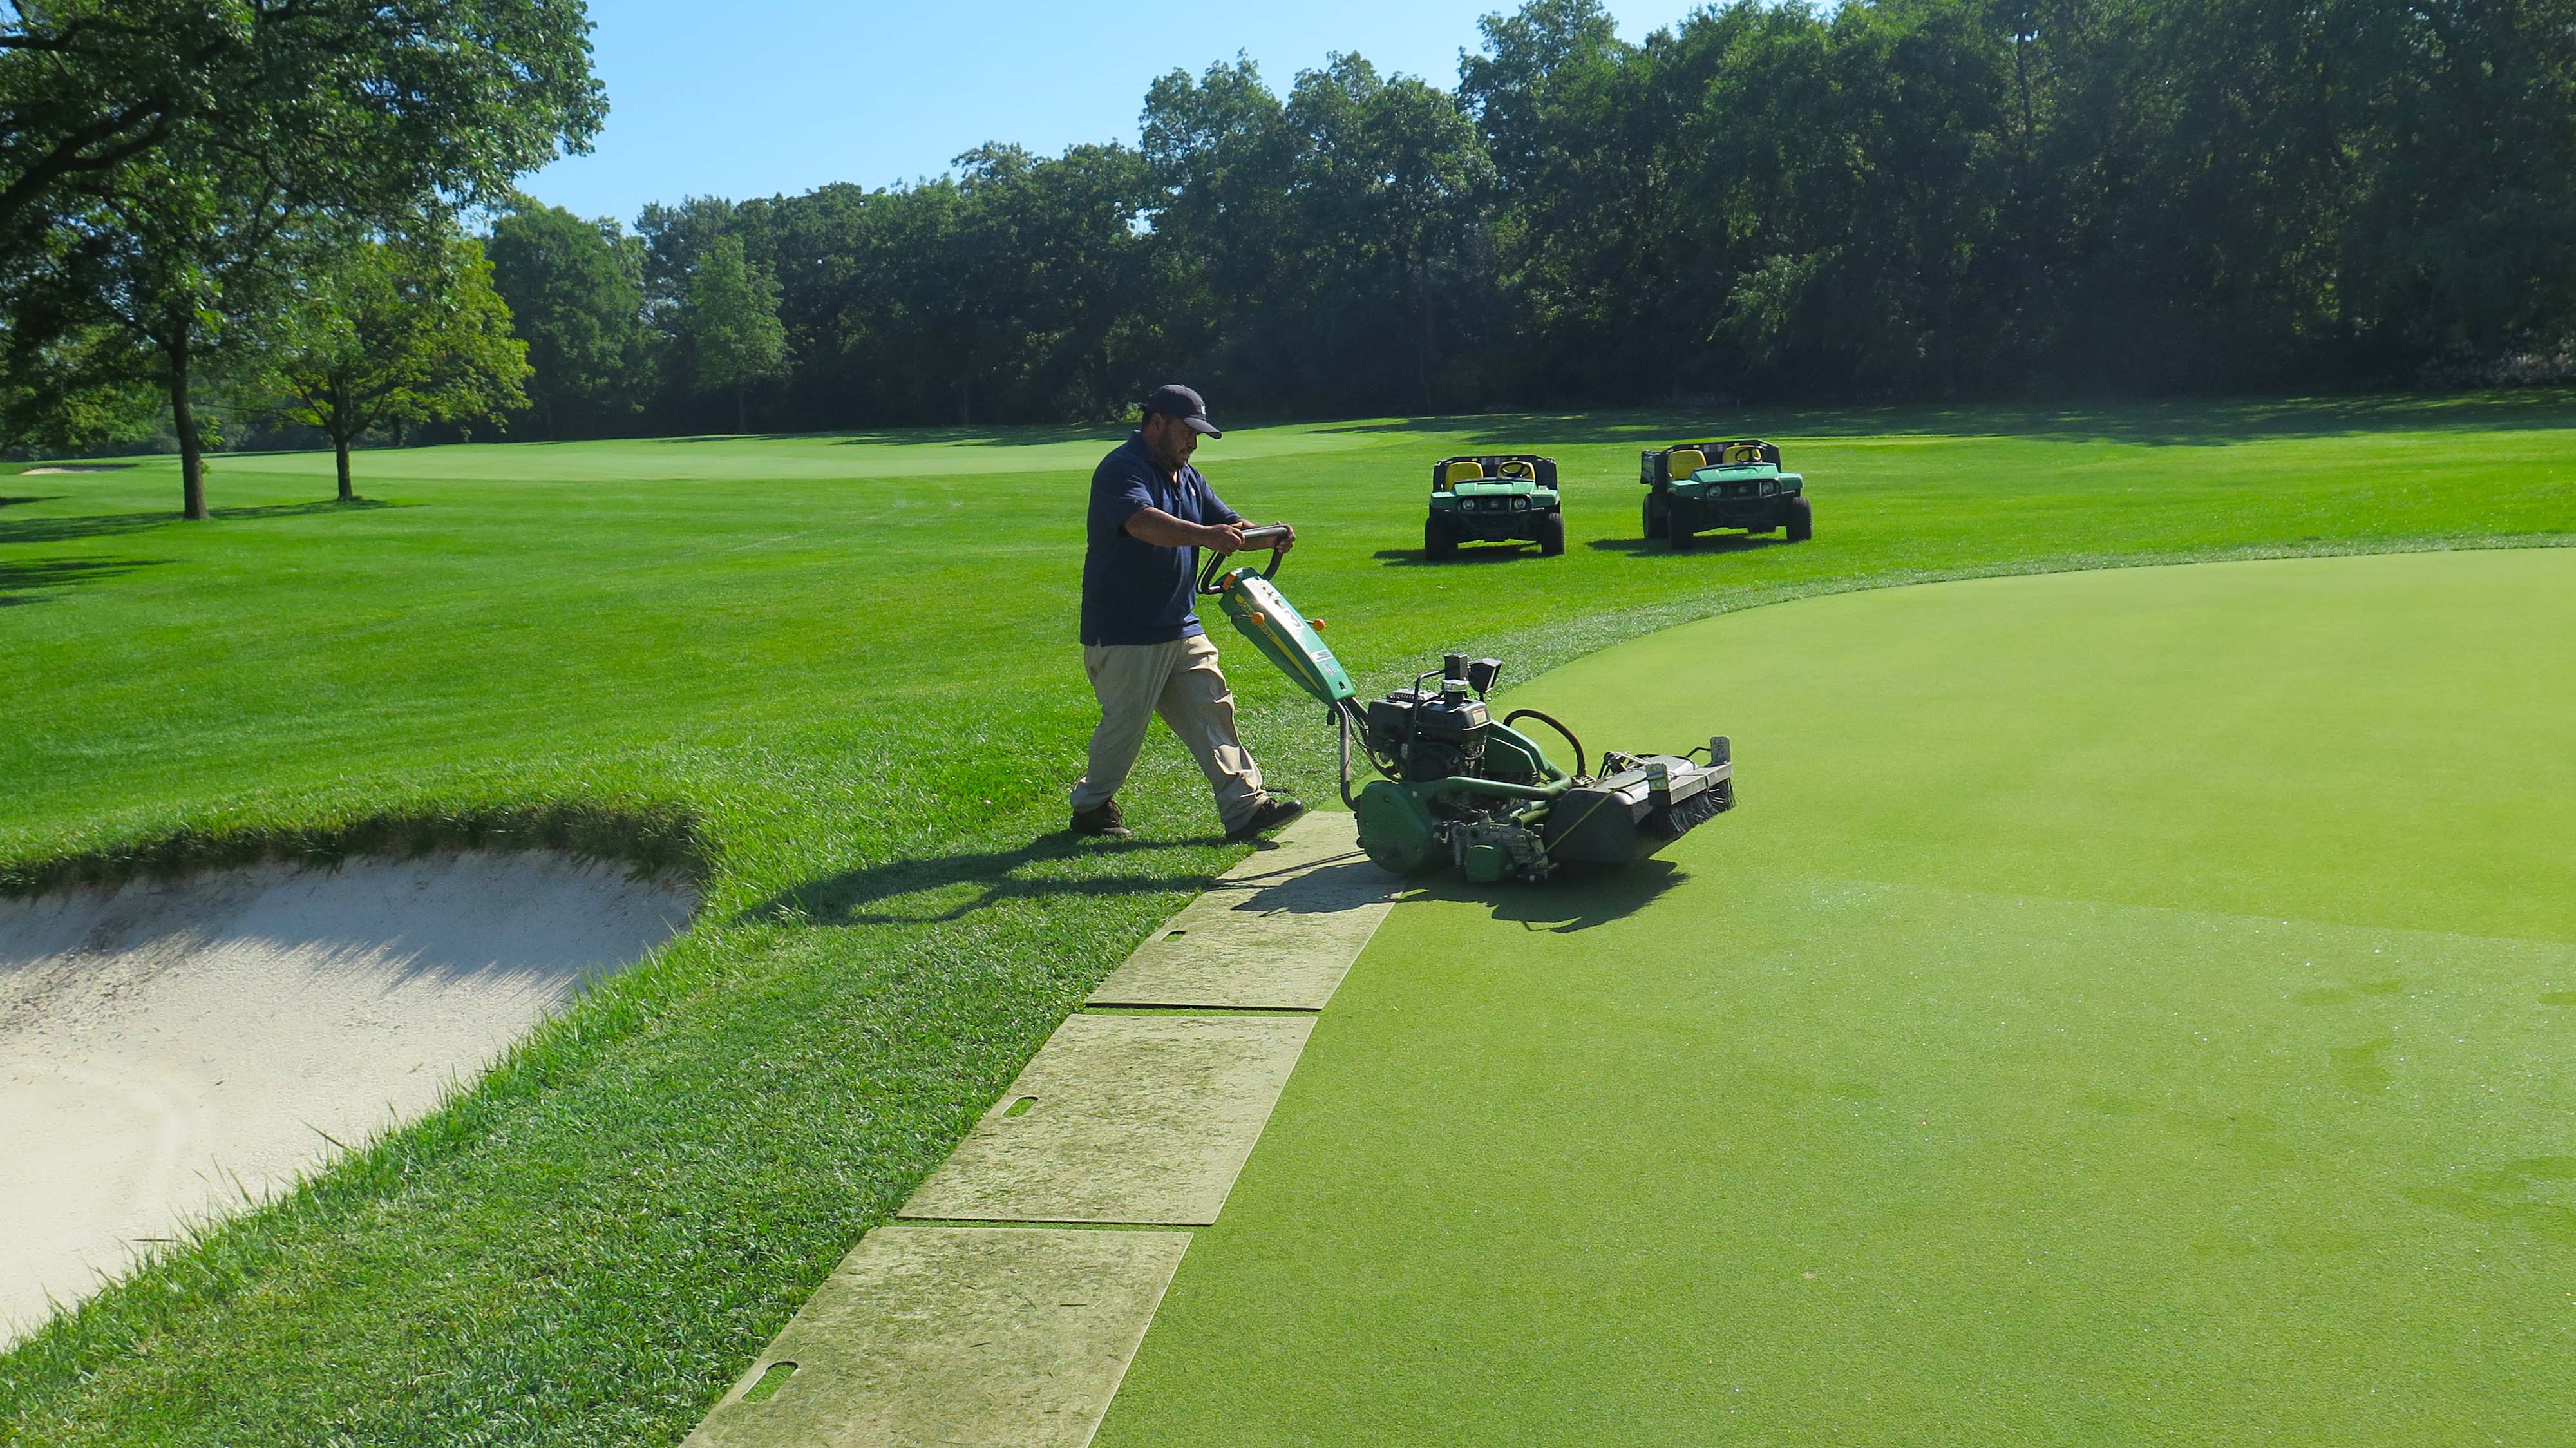 Managing Putting Greens That Are a Mix of Poa annua and Creeping Bentgrass